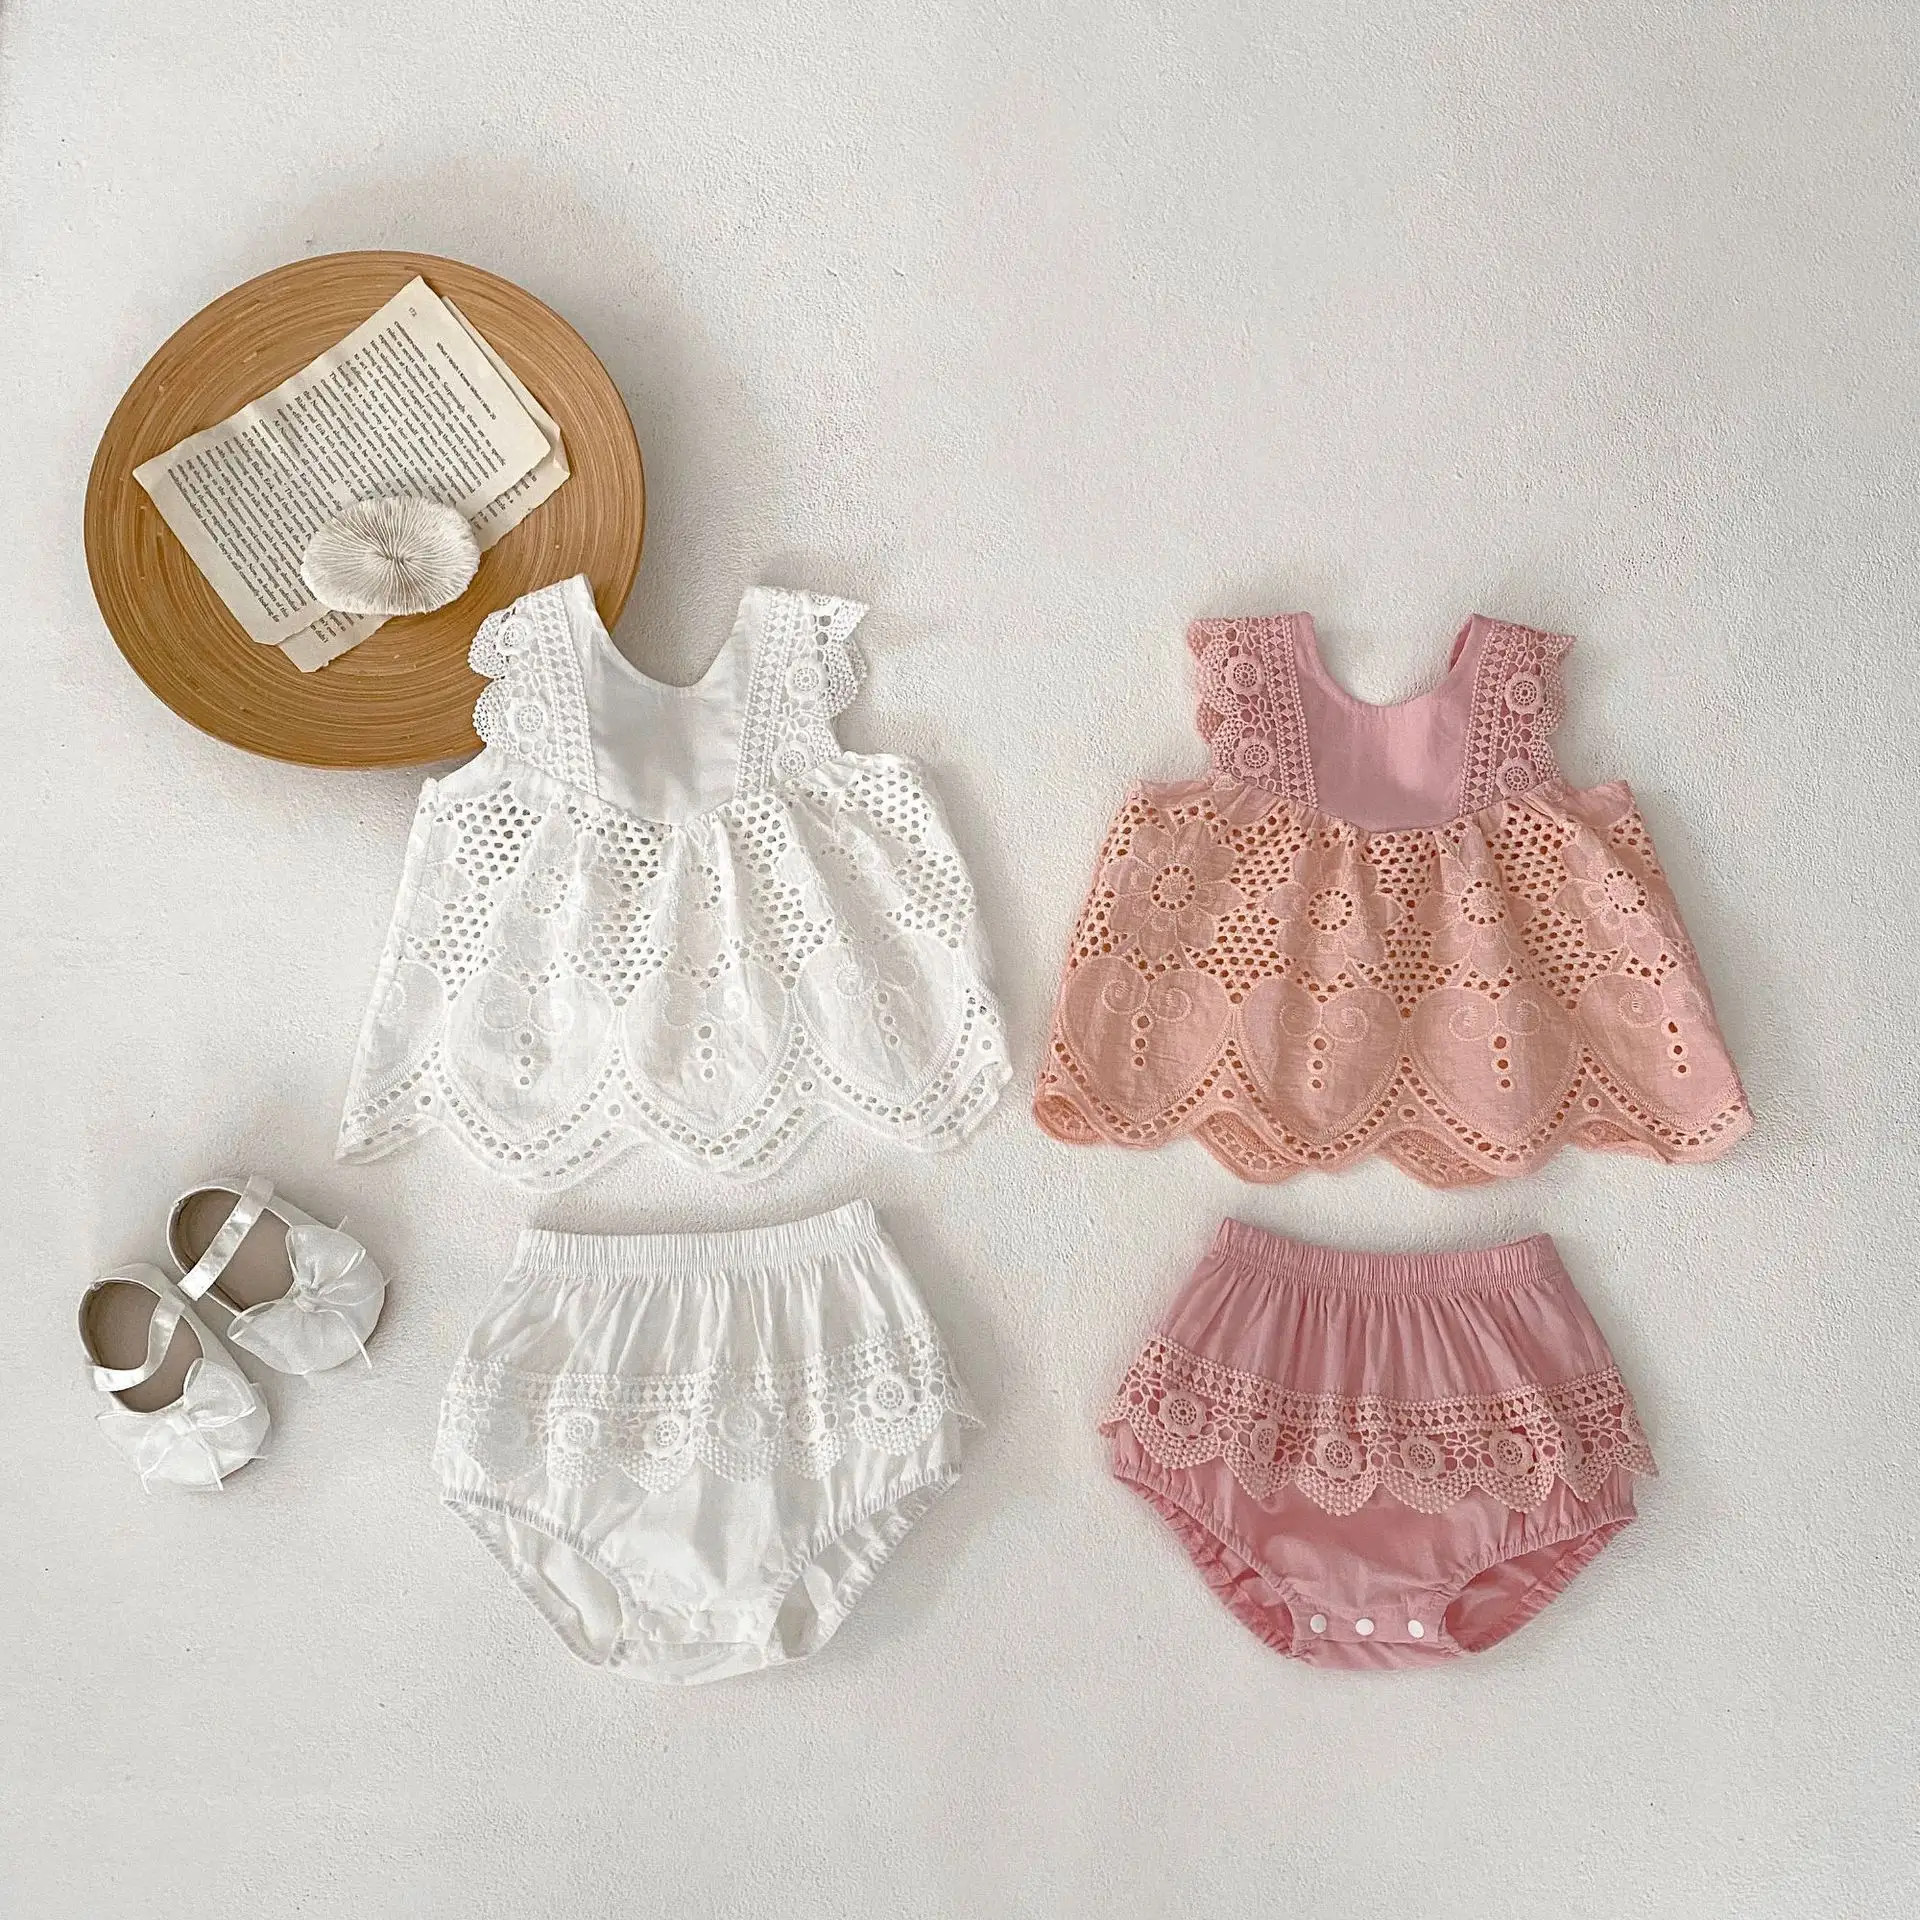 RTS Engepapa infant cotton lace shirt newborn solid color sleeveless round neck top baby girl clothing set